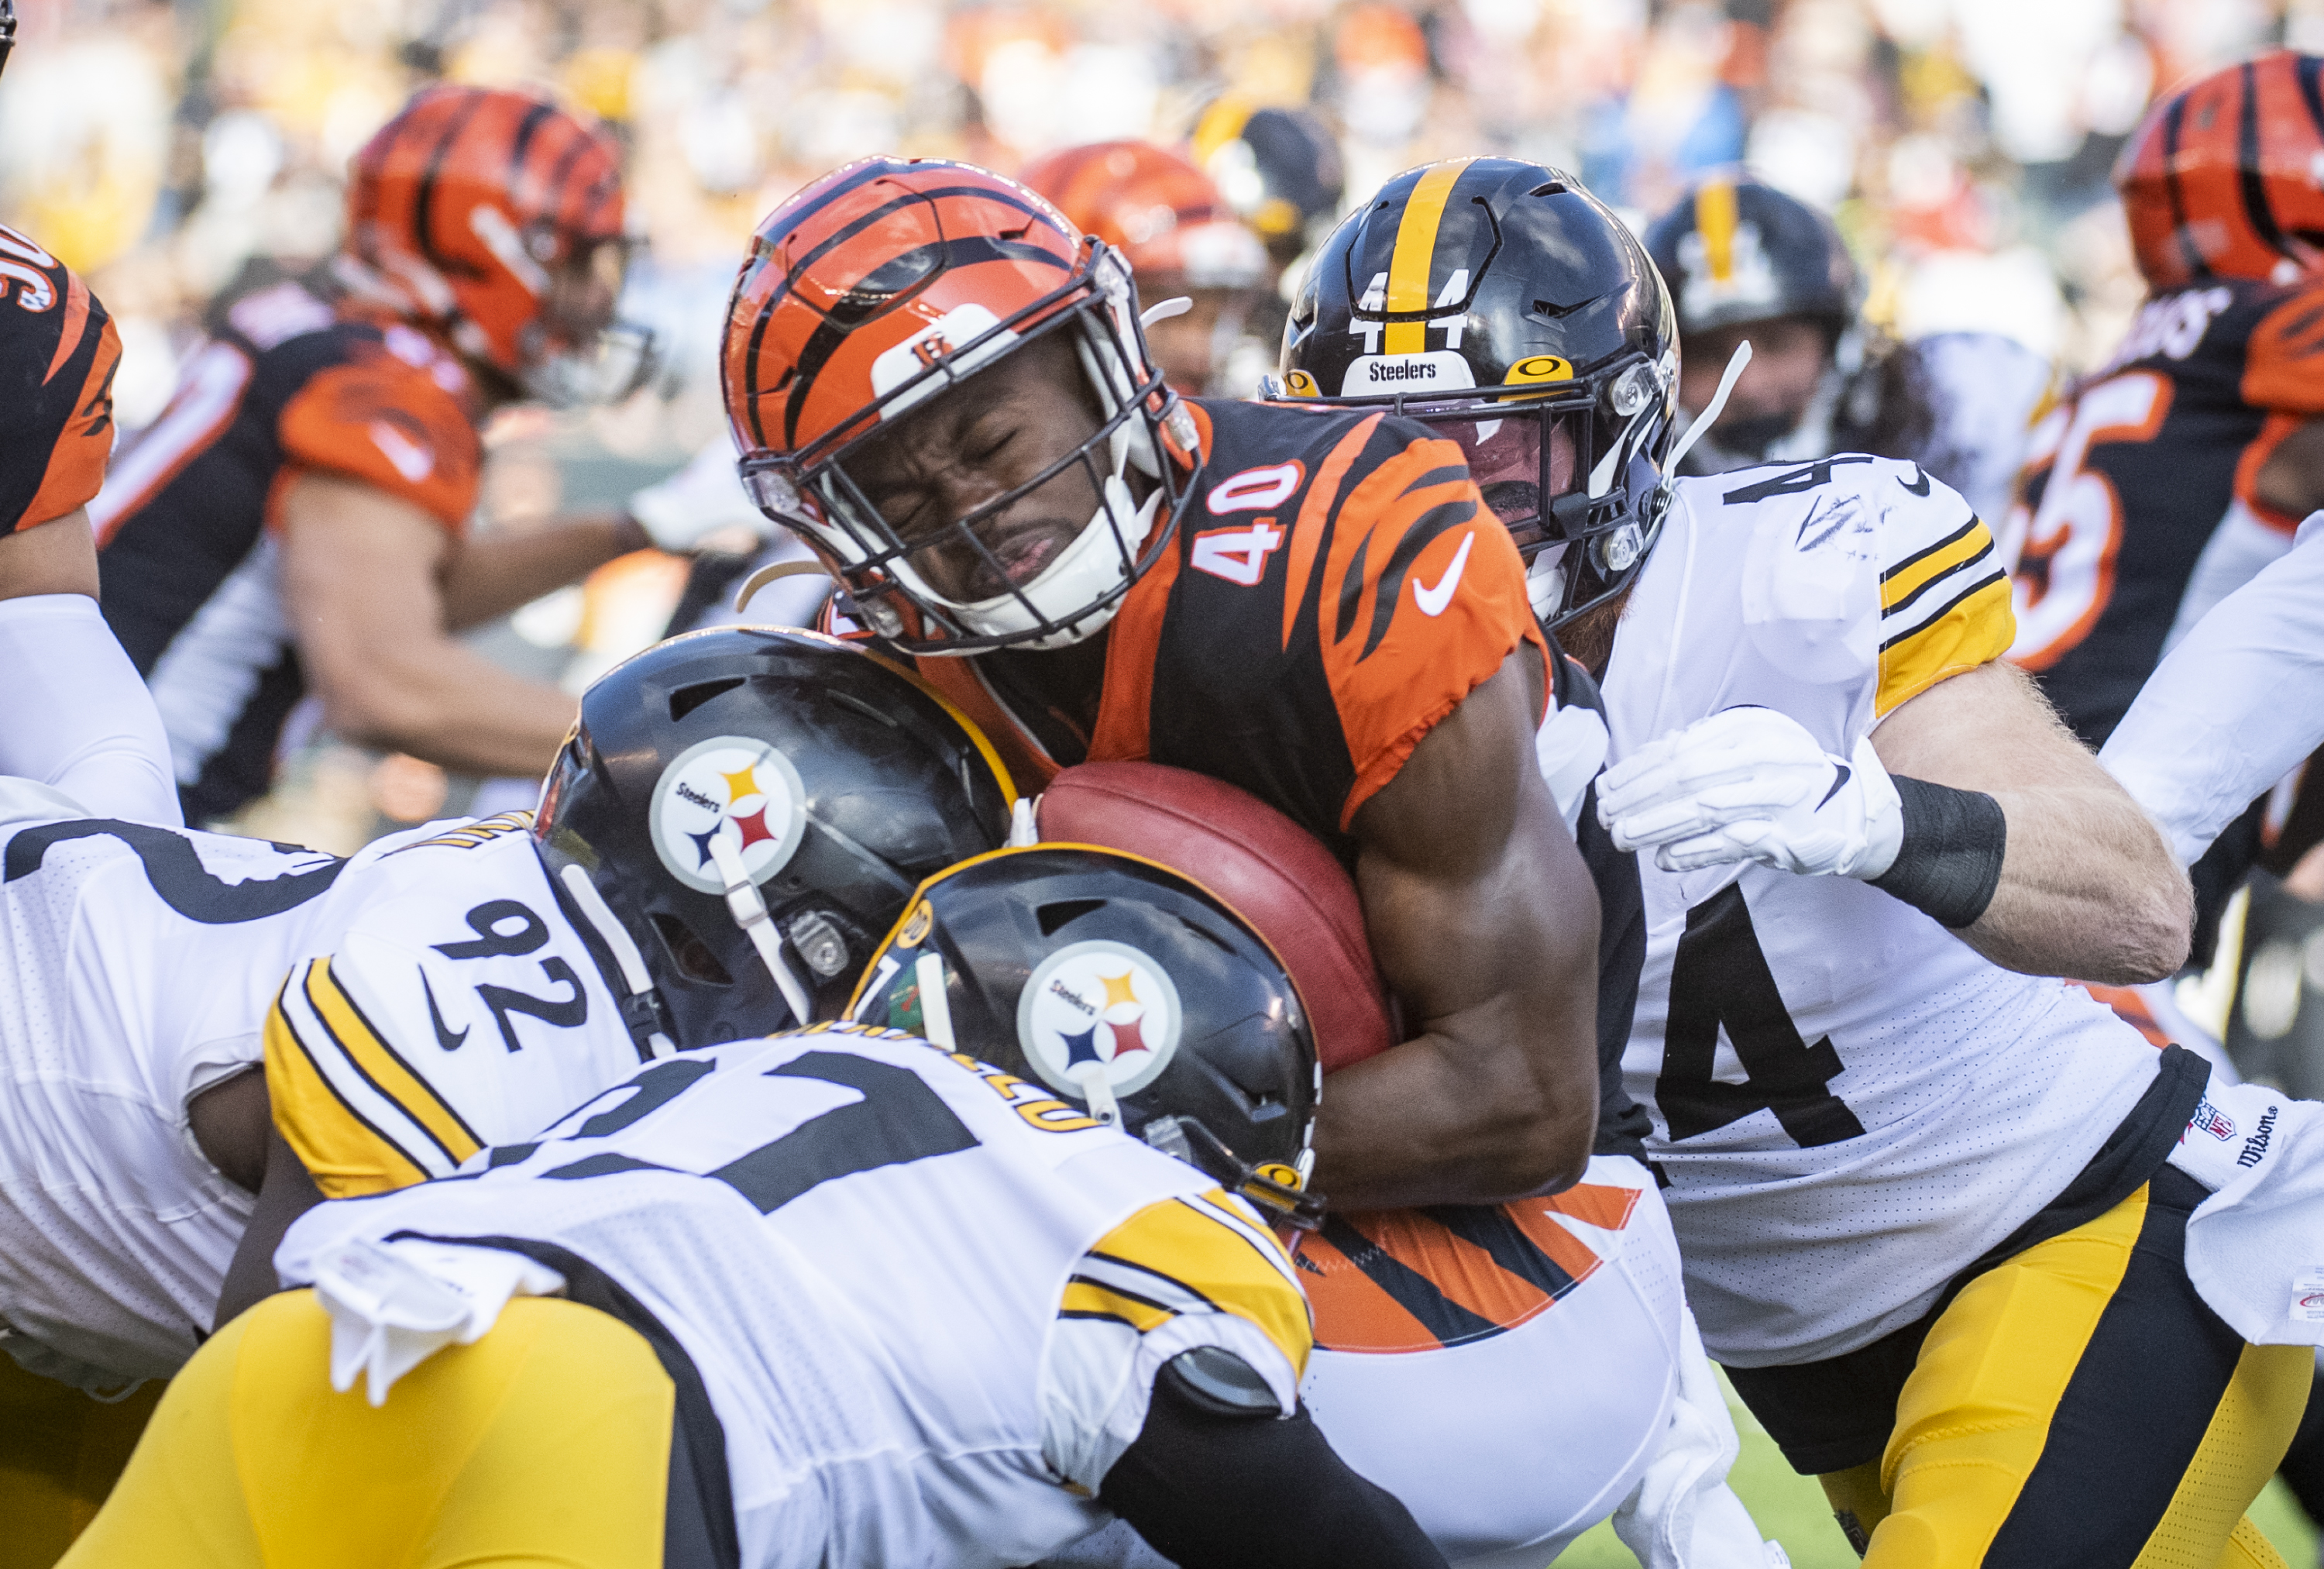 Bengals off to best start after 16-10 win over Steelers